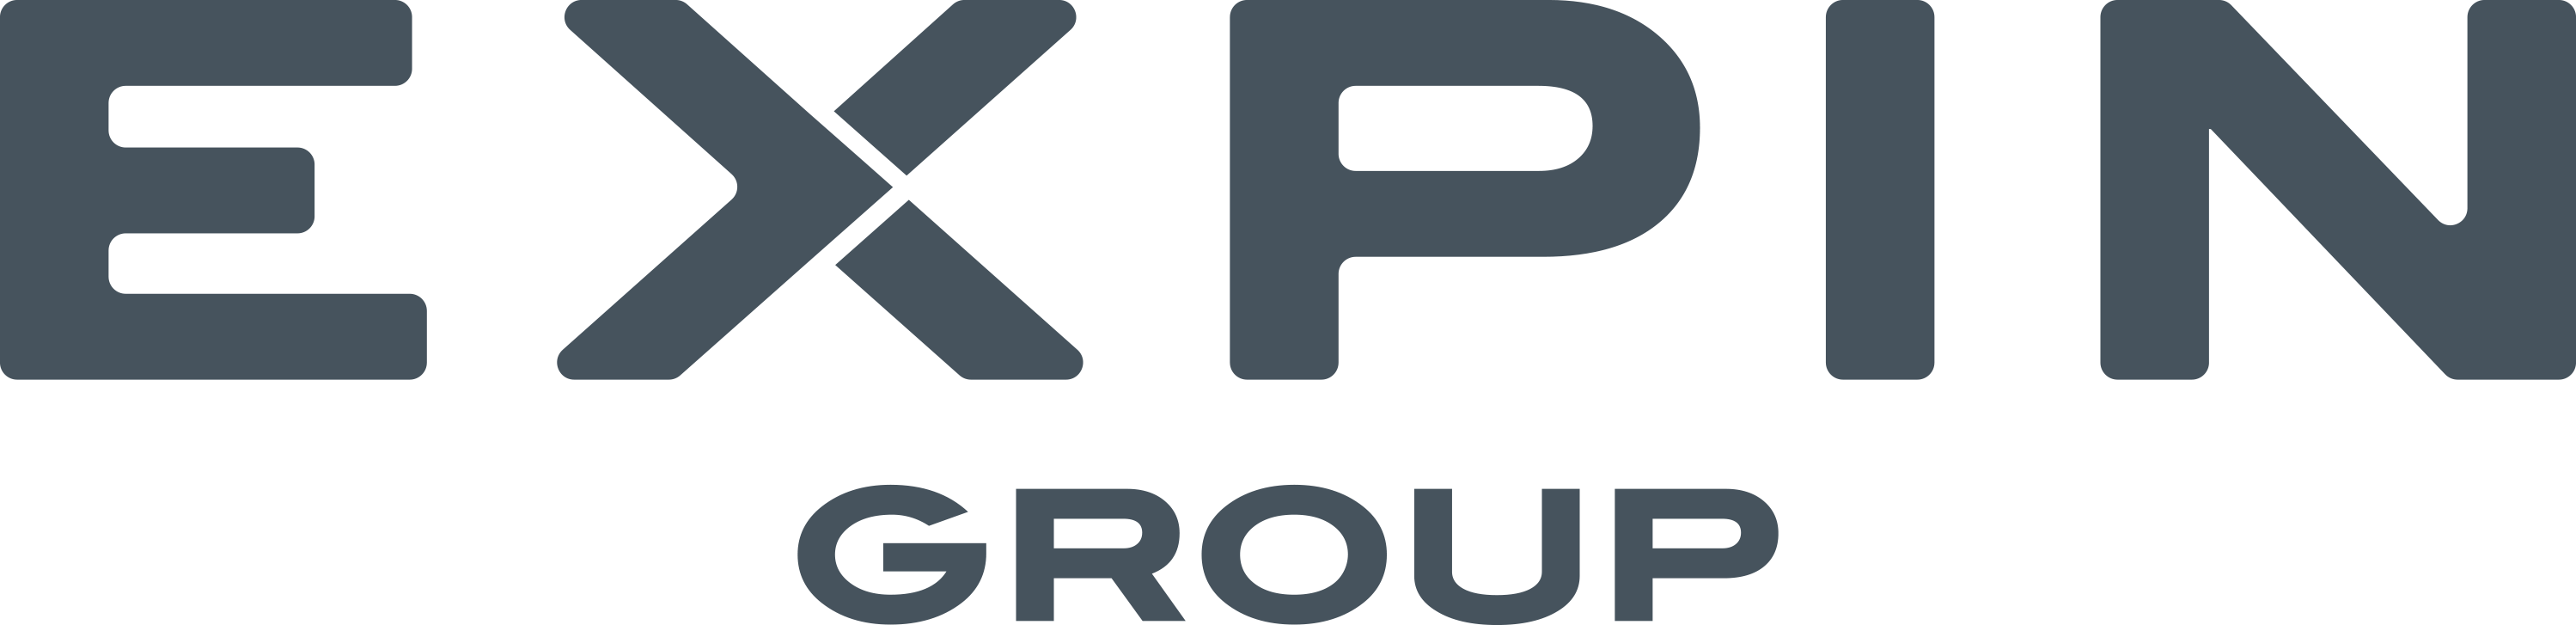 expin group.svg